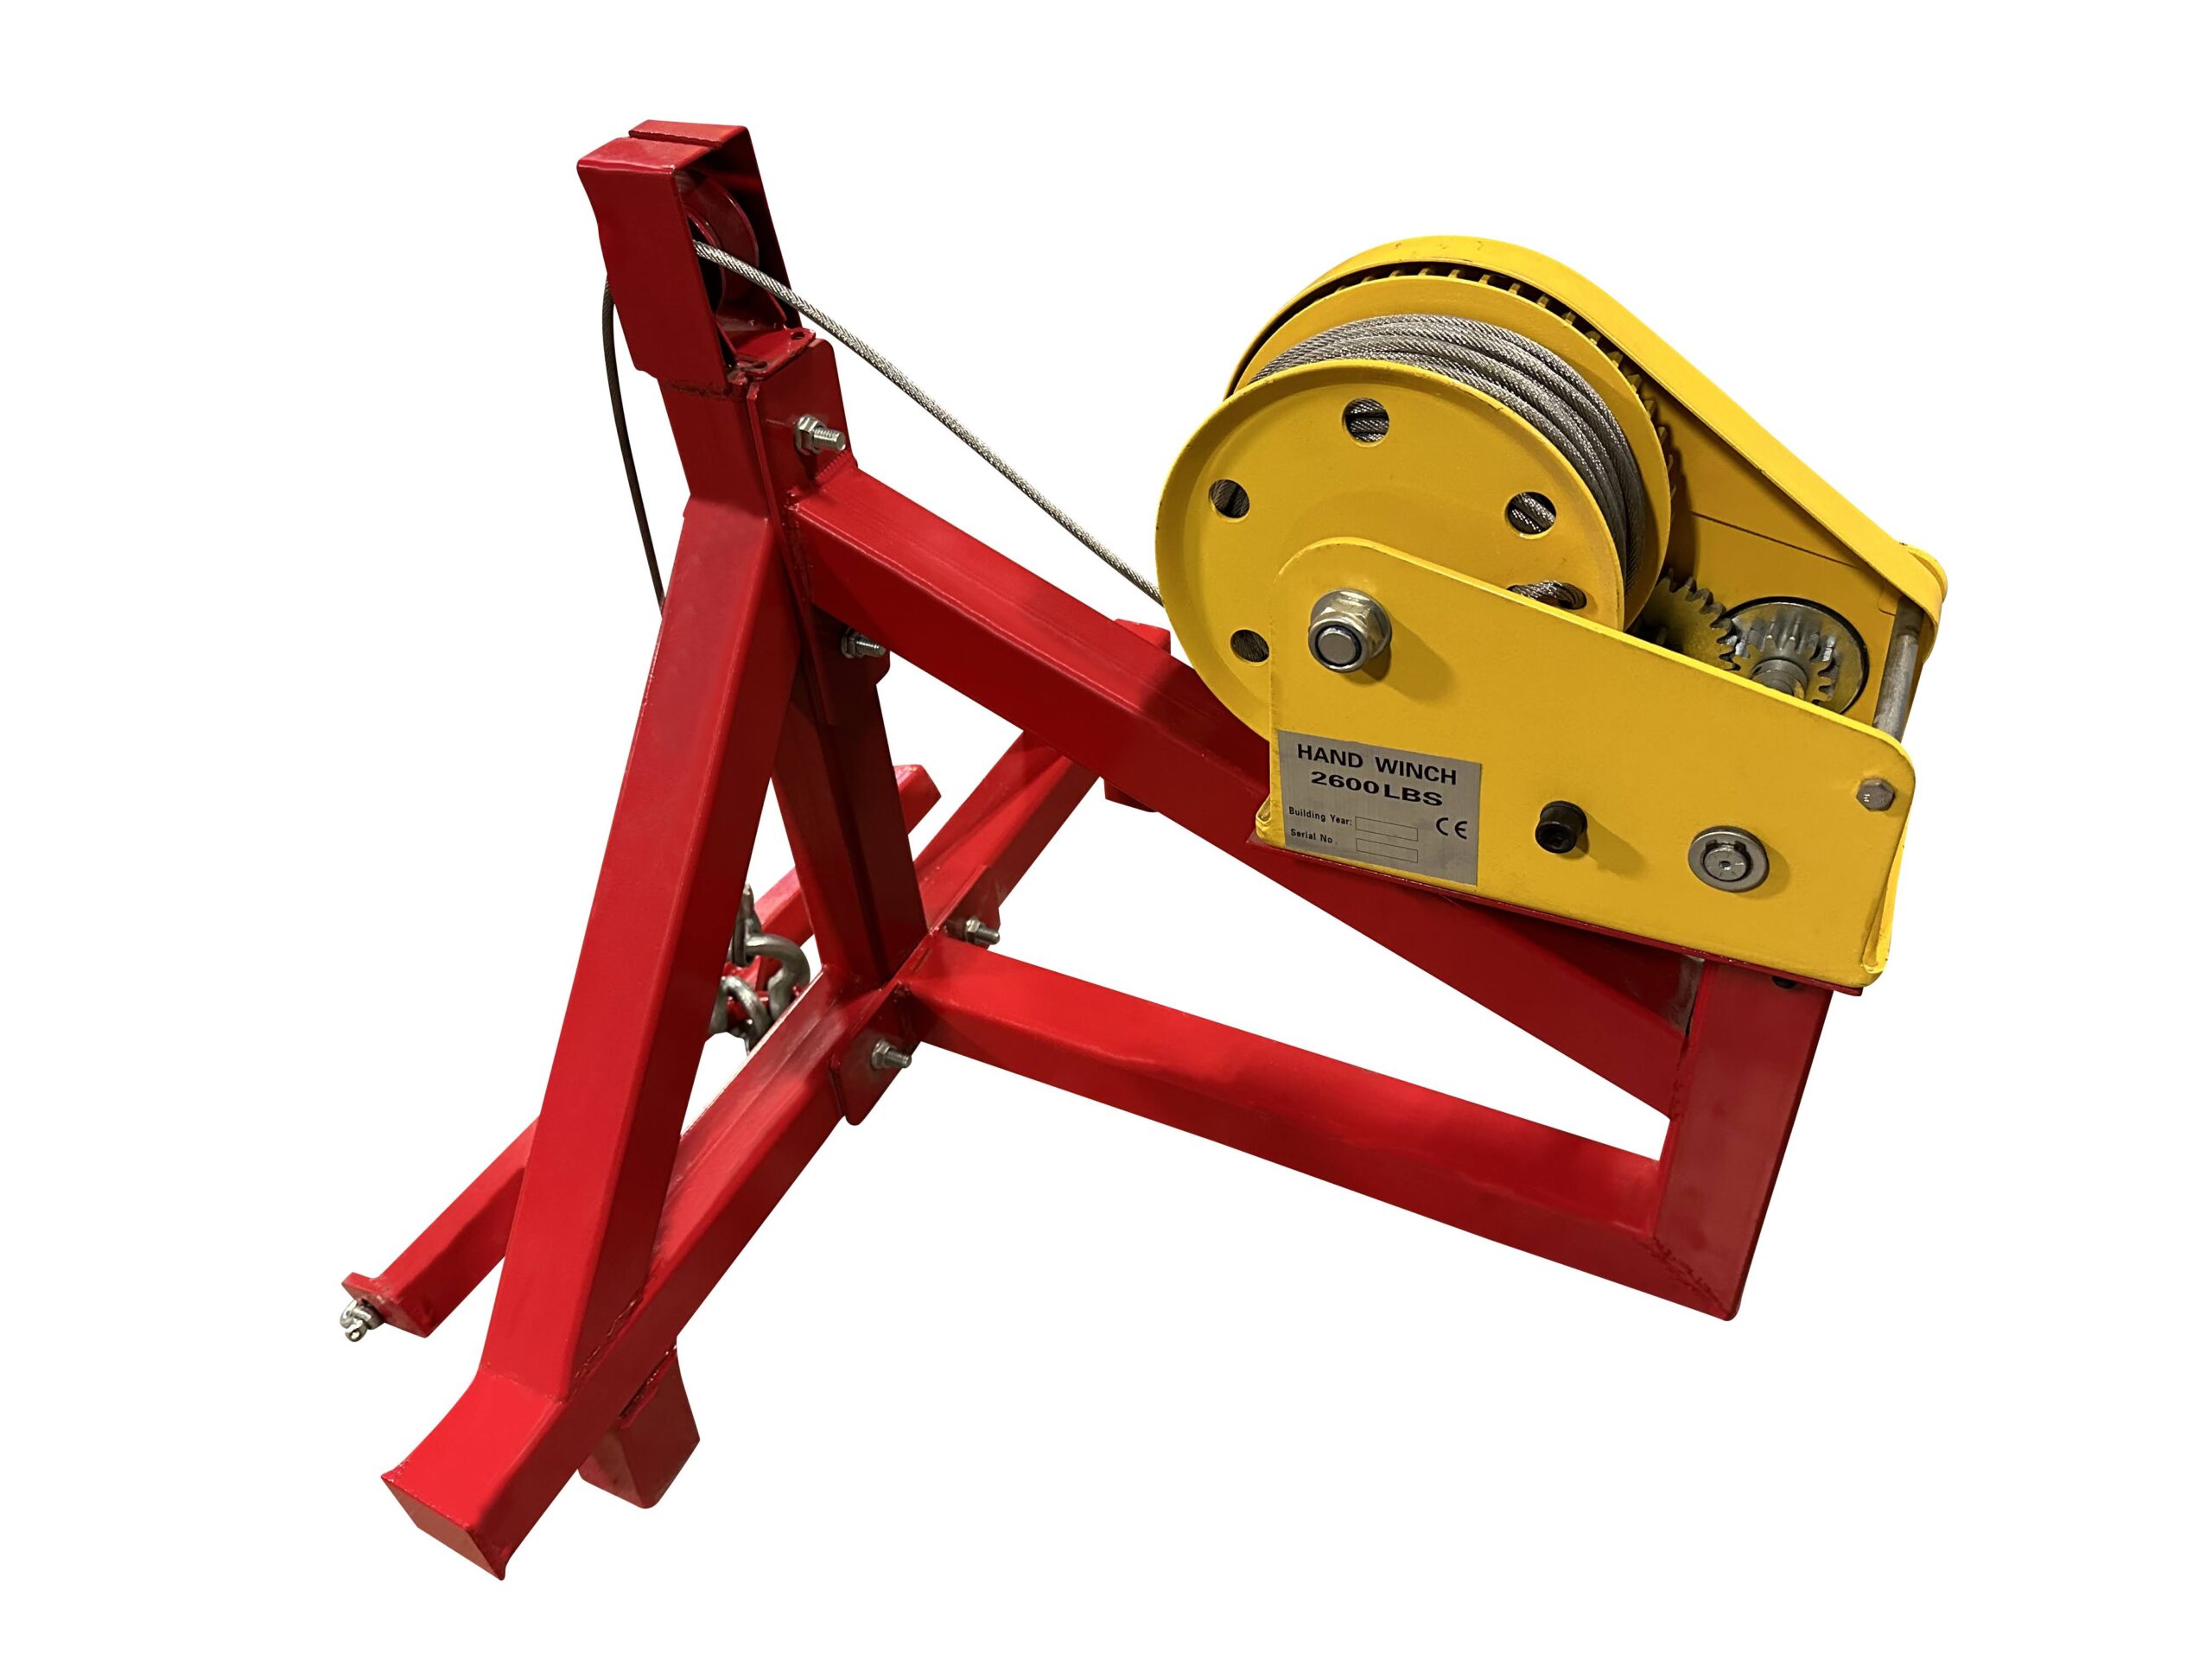 winch,pulley,lifting device,winch system,pulley system,manual winch,electric winch,winch lifting capacity,hand winch,winch definition,hand crank winch,what is a winch